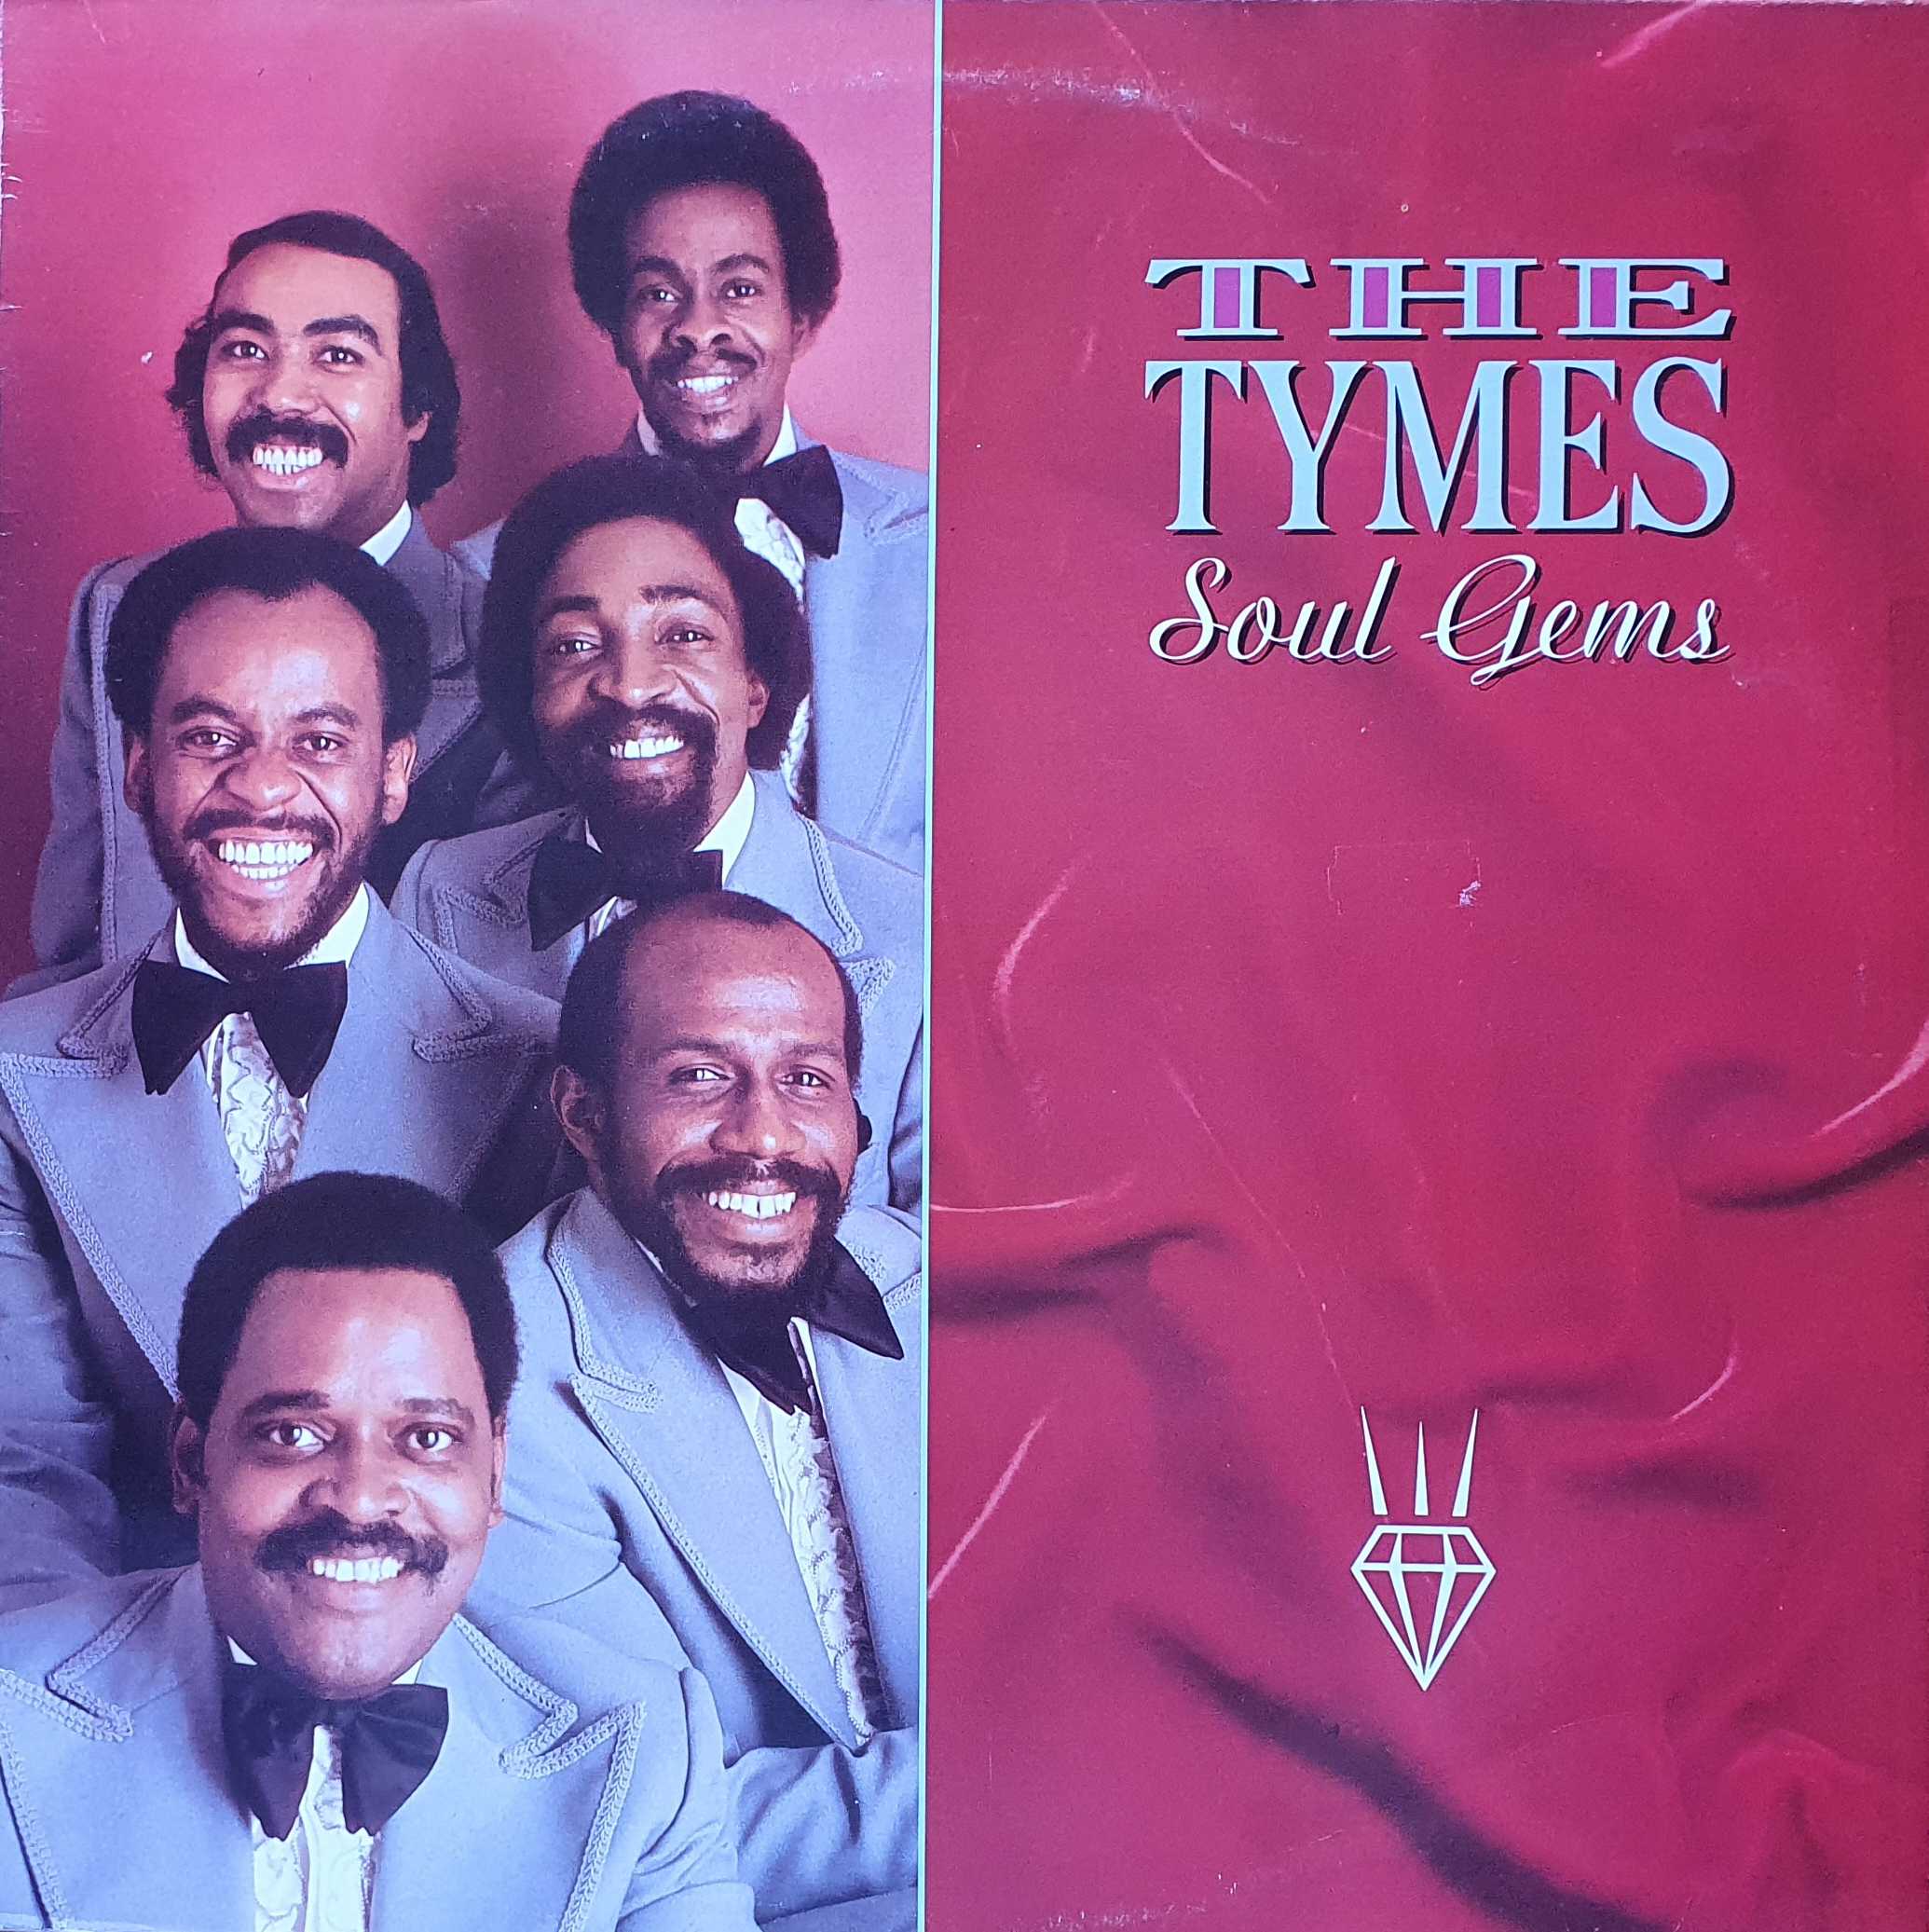 Picture of Soul gems by artist The Tymes from the BBC albums - Records and Tapes library